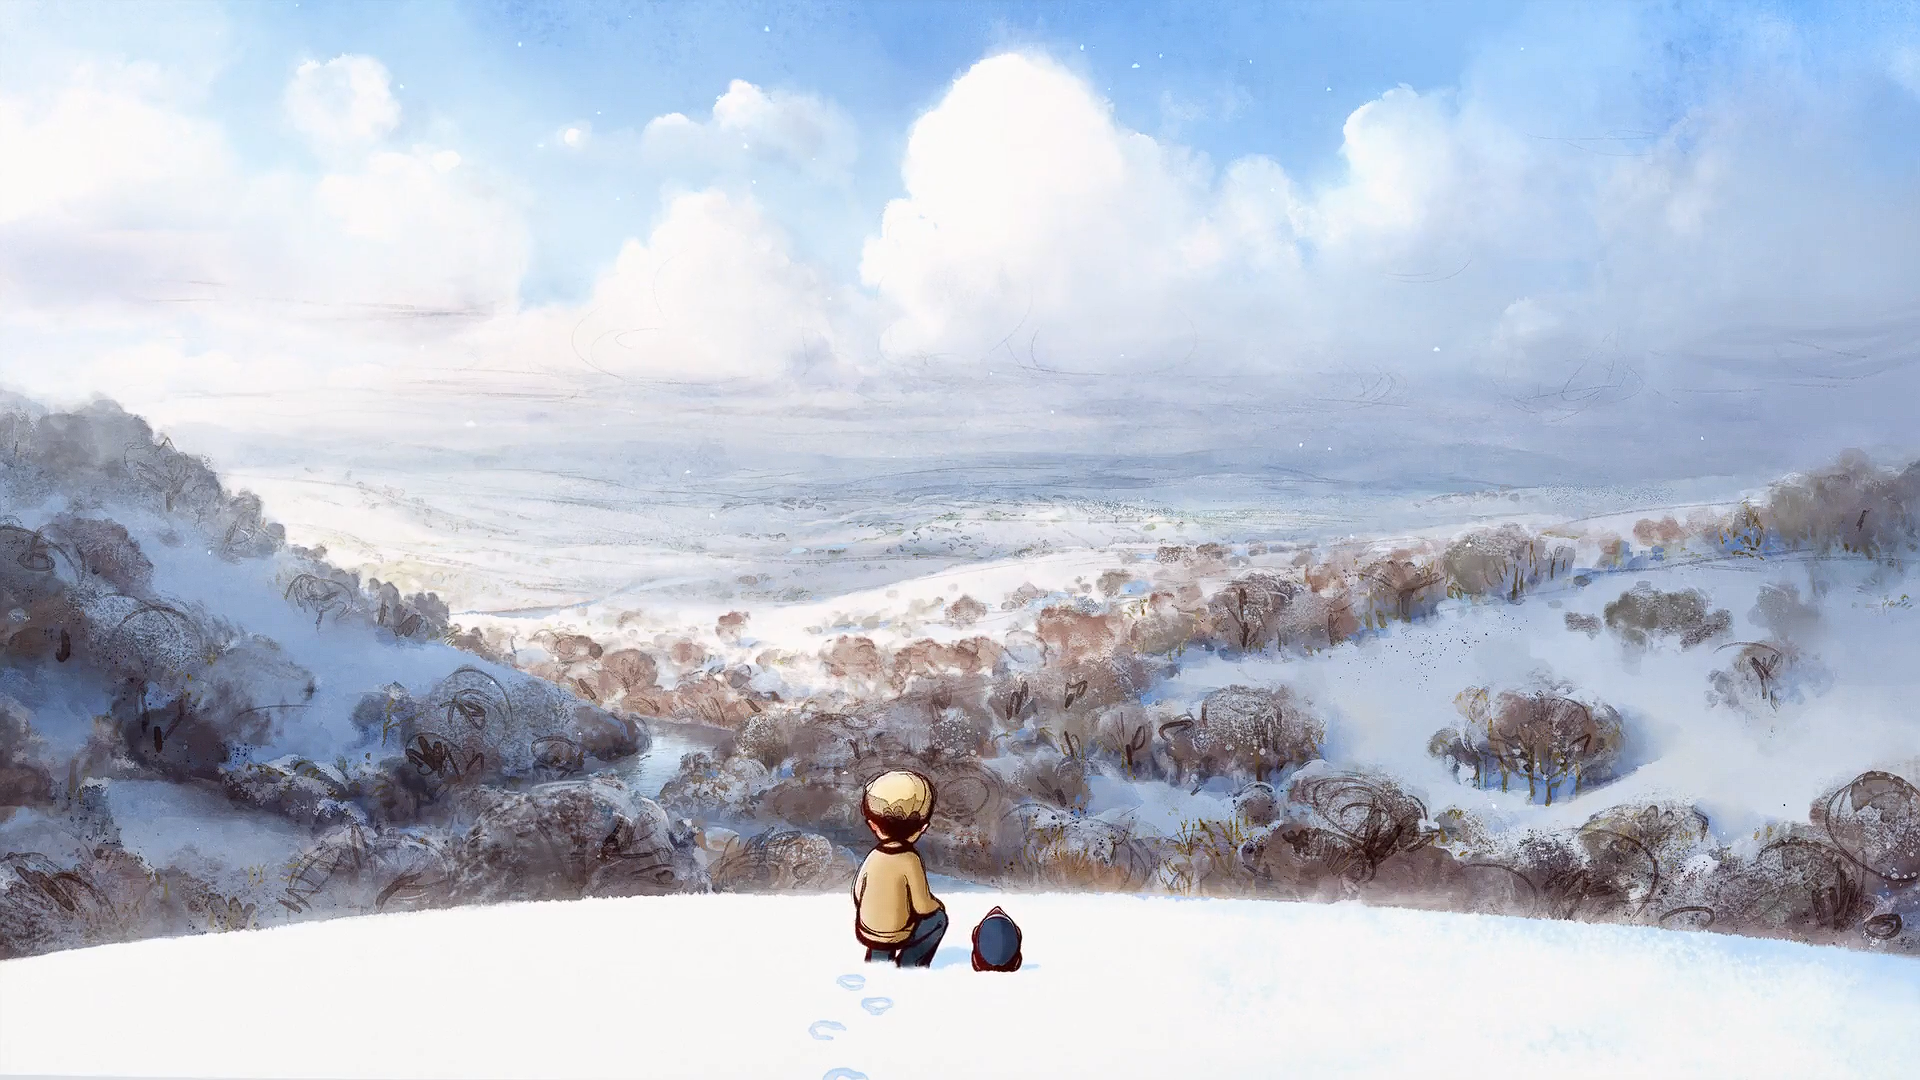 Anime 1920x1080 The Boy, the Mole, the Fox and the Horse animation movie characters film stills winter snow mole (animal) nature clouds landscape anime